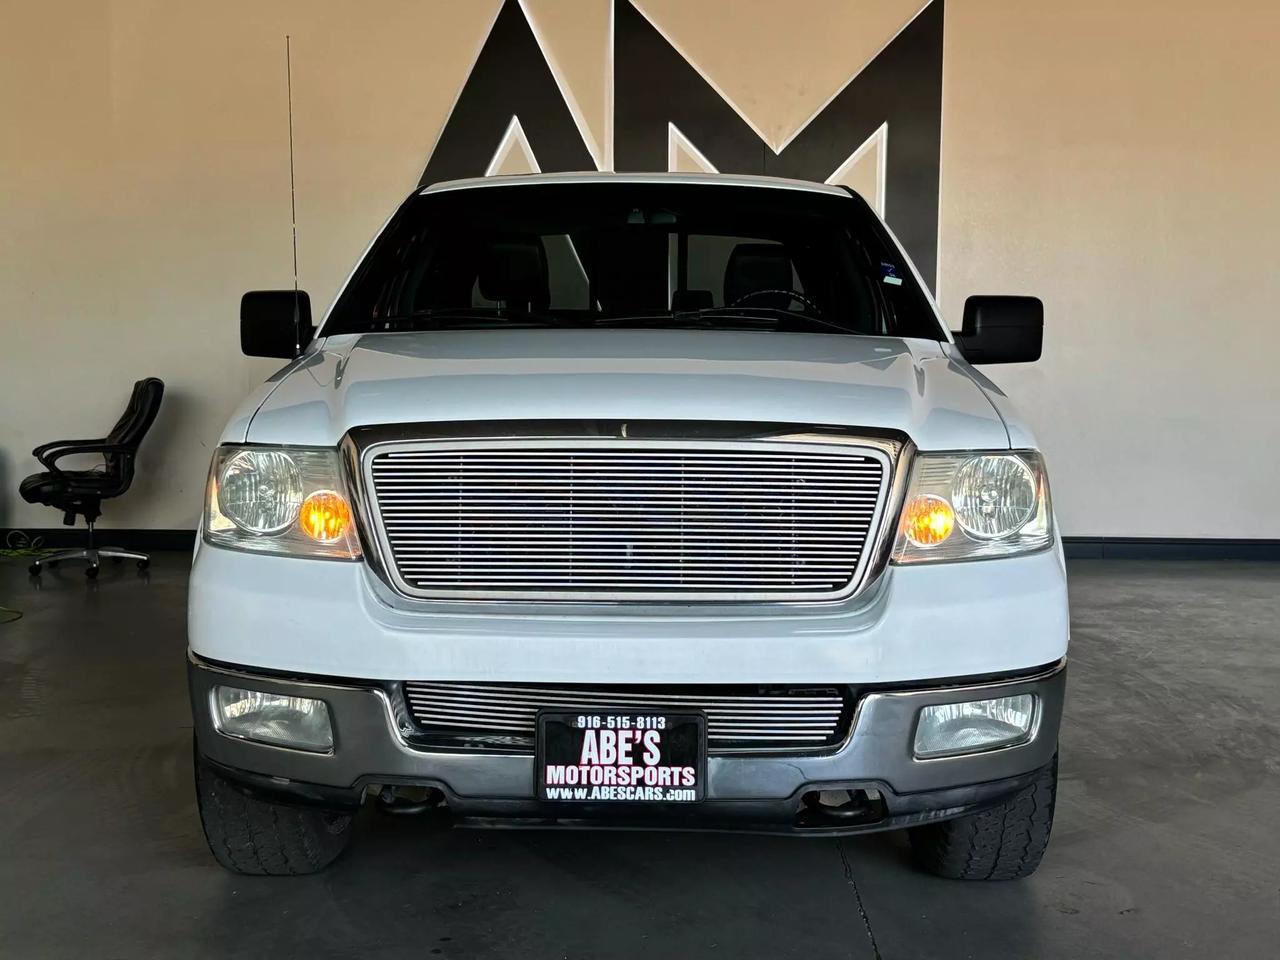 Used 2004 Ford F-150 FX4 with VIN 1FTPW14594KA83396 for sale in Sacramento, CA